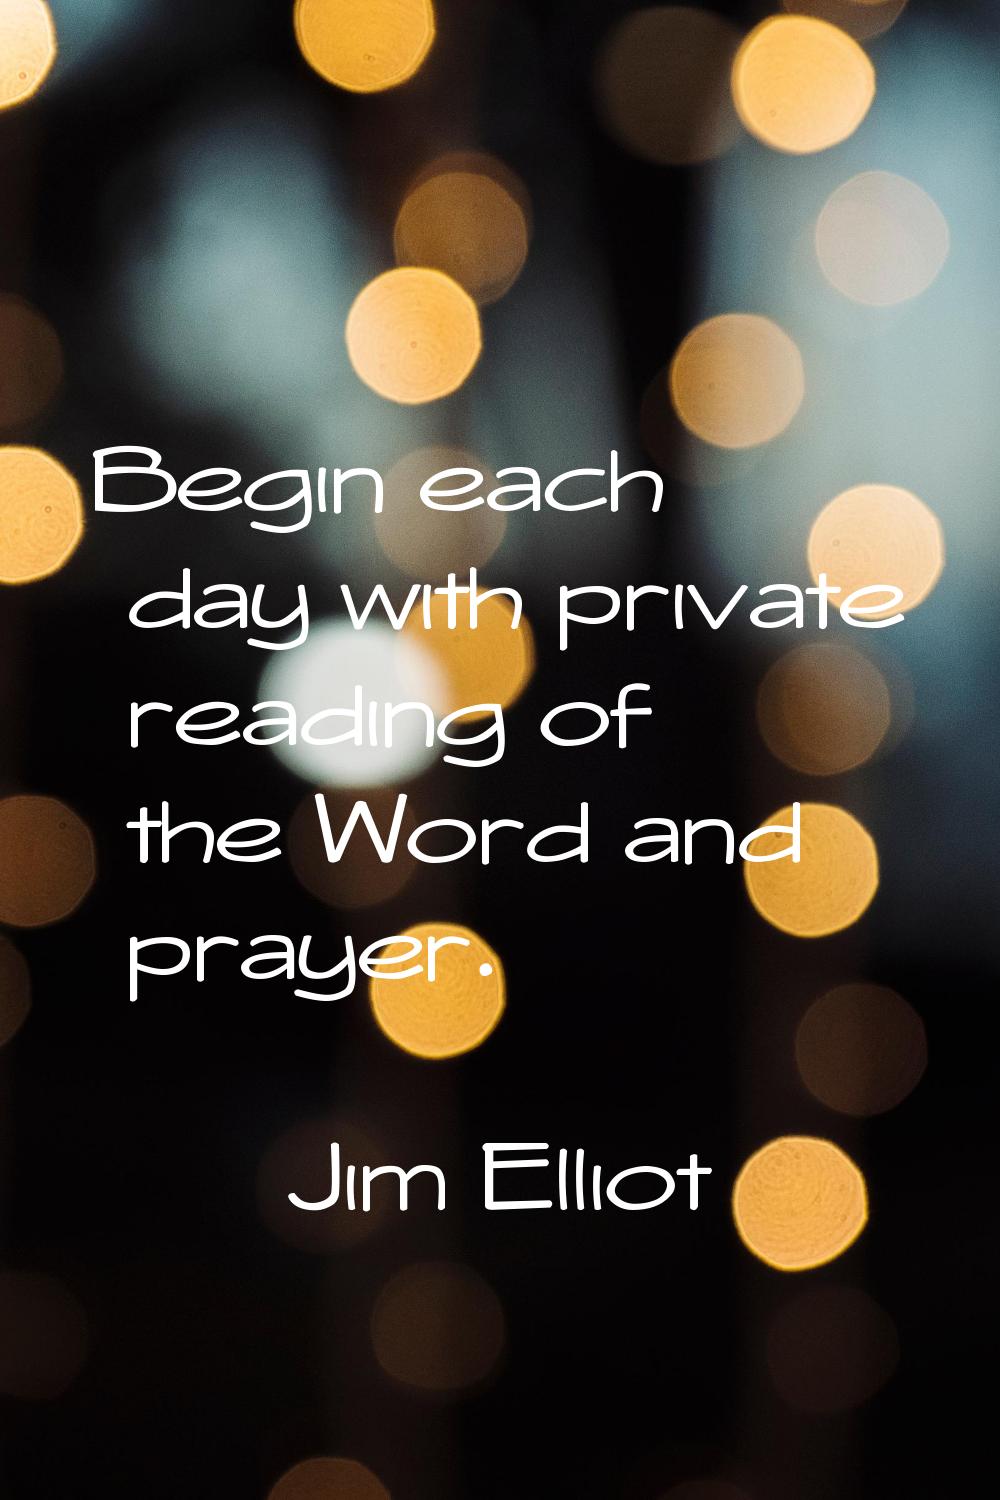 Begin each day with private reading of the Word and prayer.